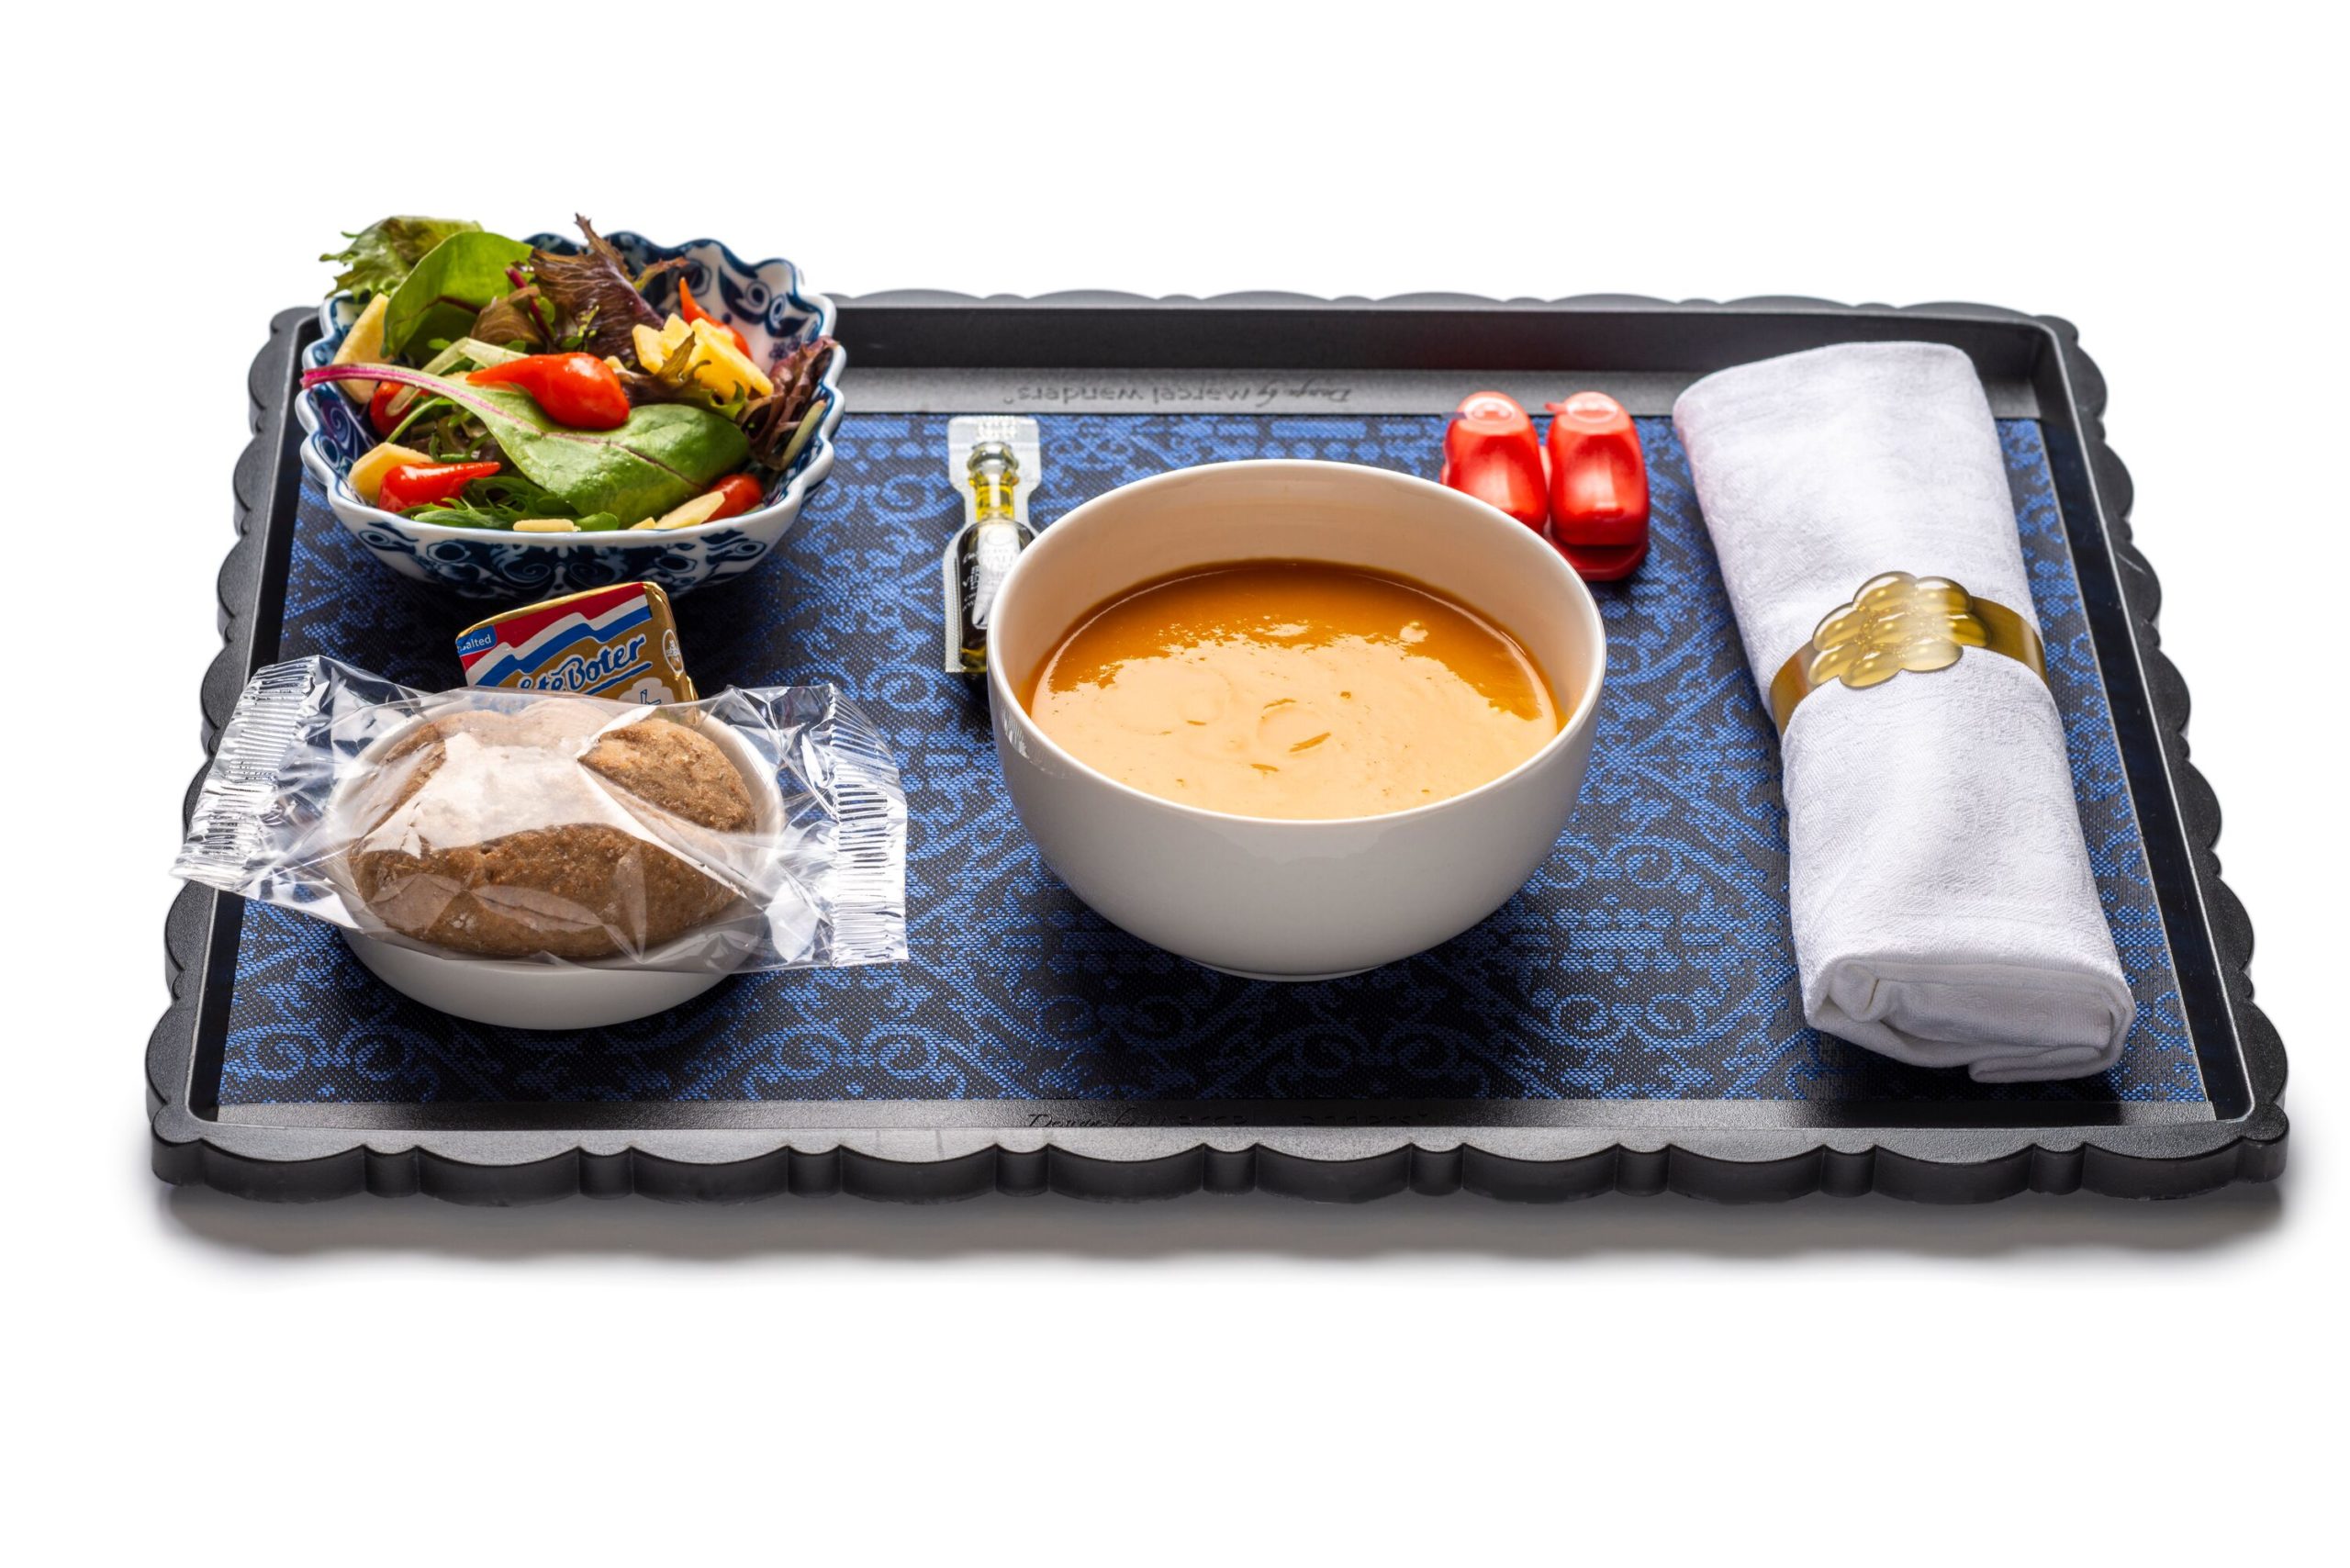 KLM Catering